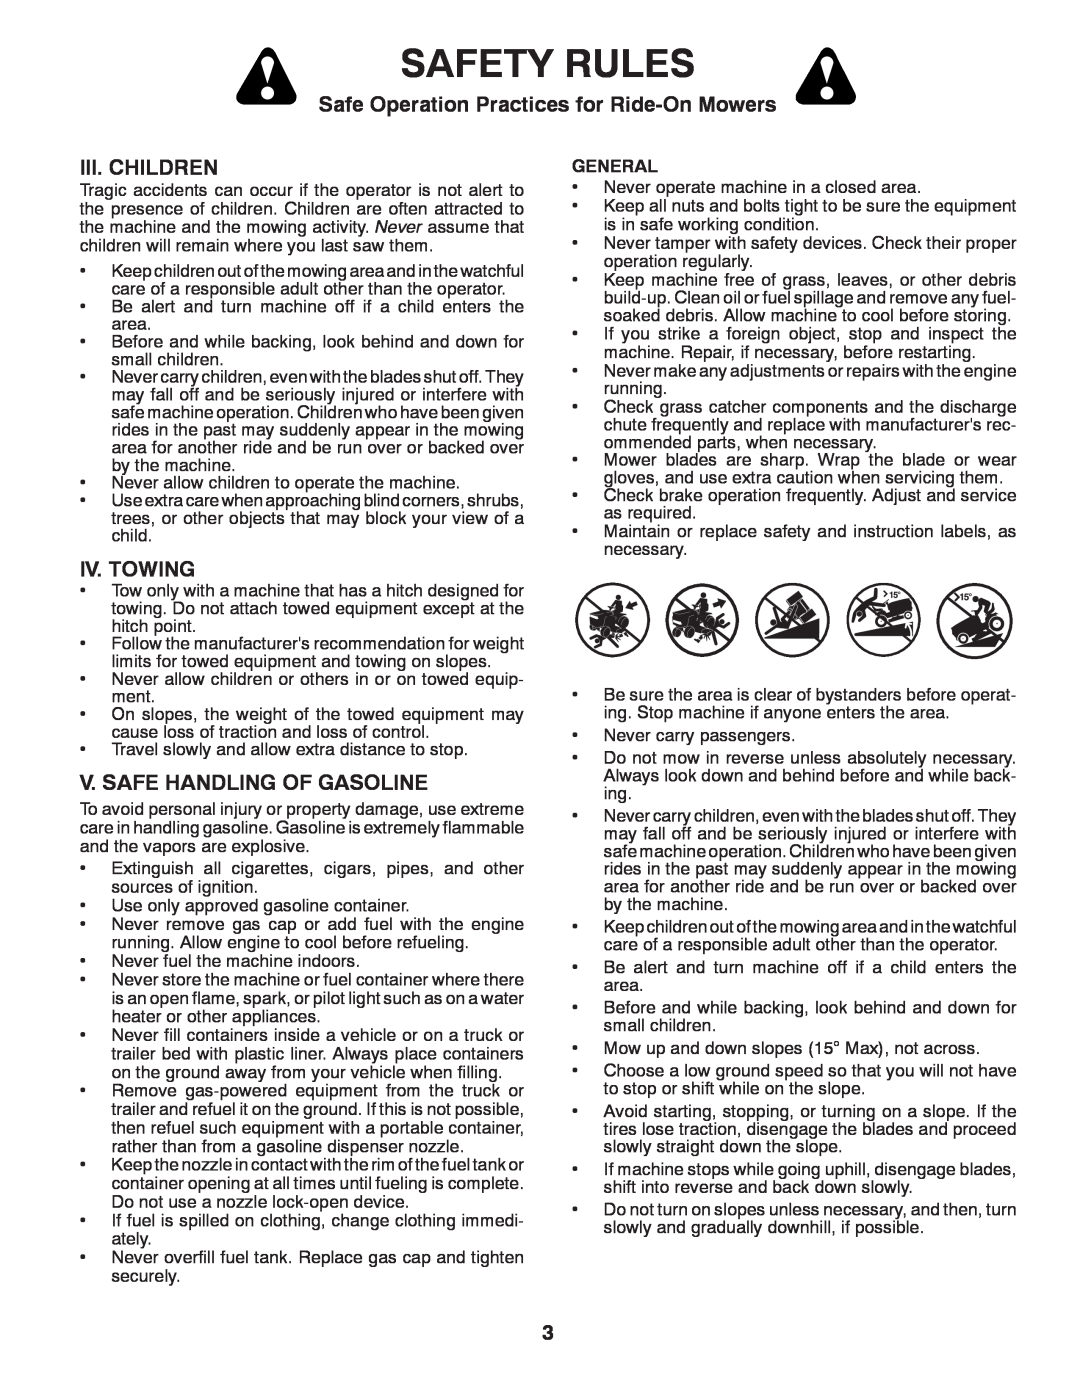 Husqvarna 917.2896 owner manual Safety Rules, Safe Operation Practices for Ride-On Mowers, Iii. Children, Iv. Towing 